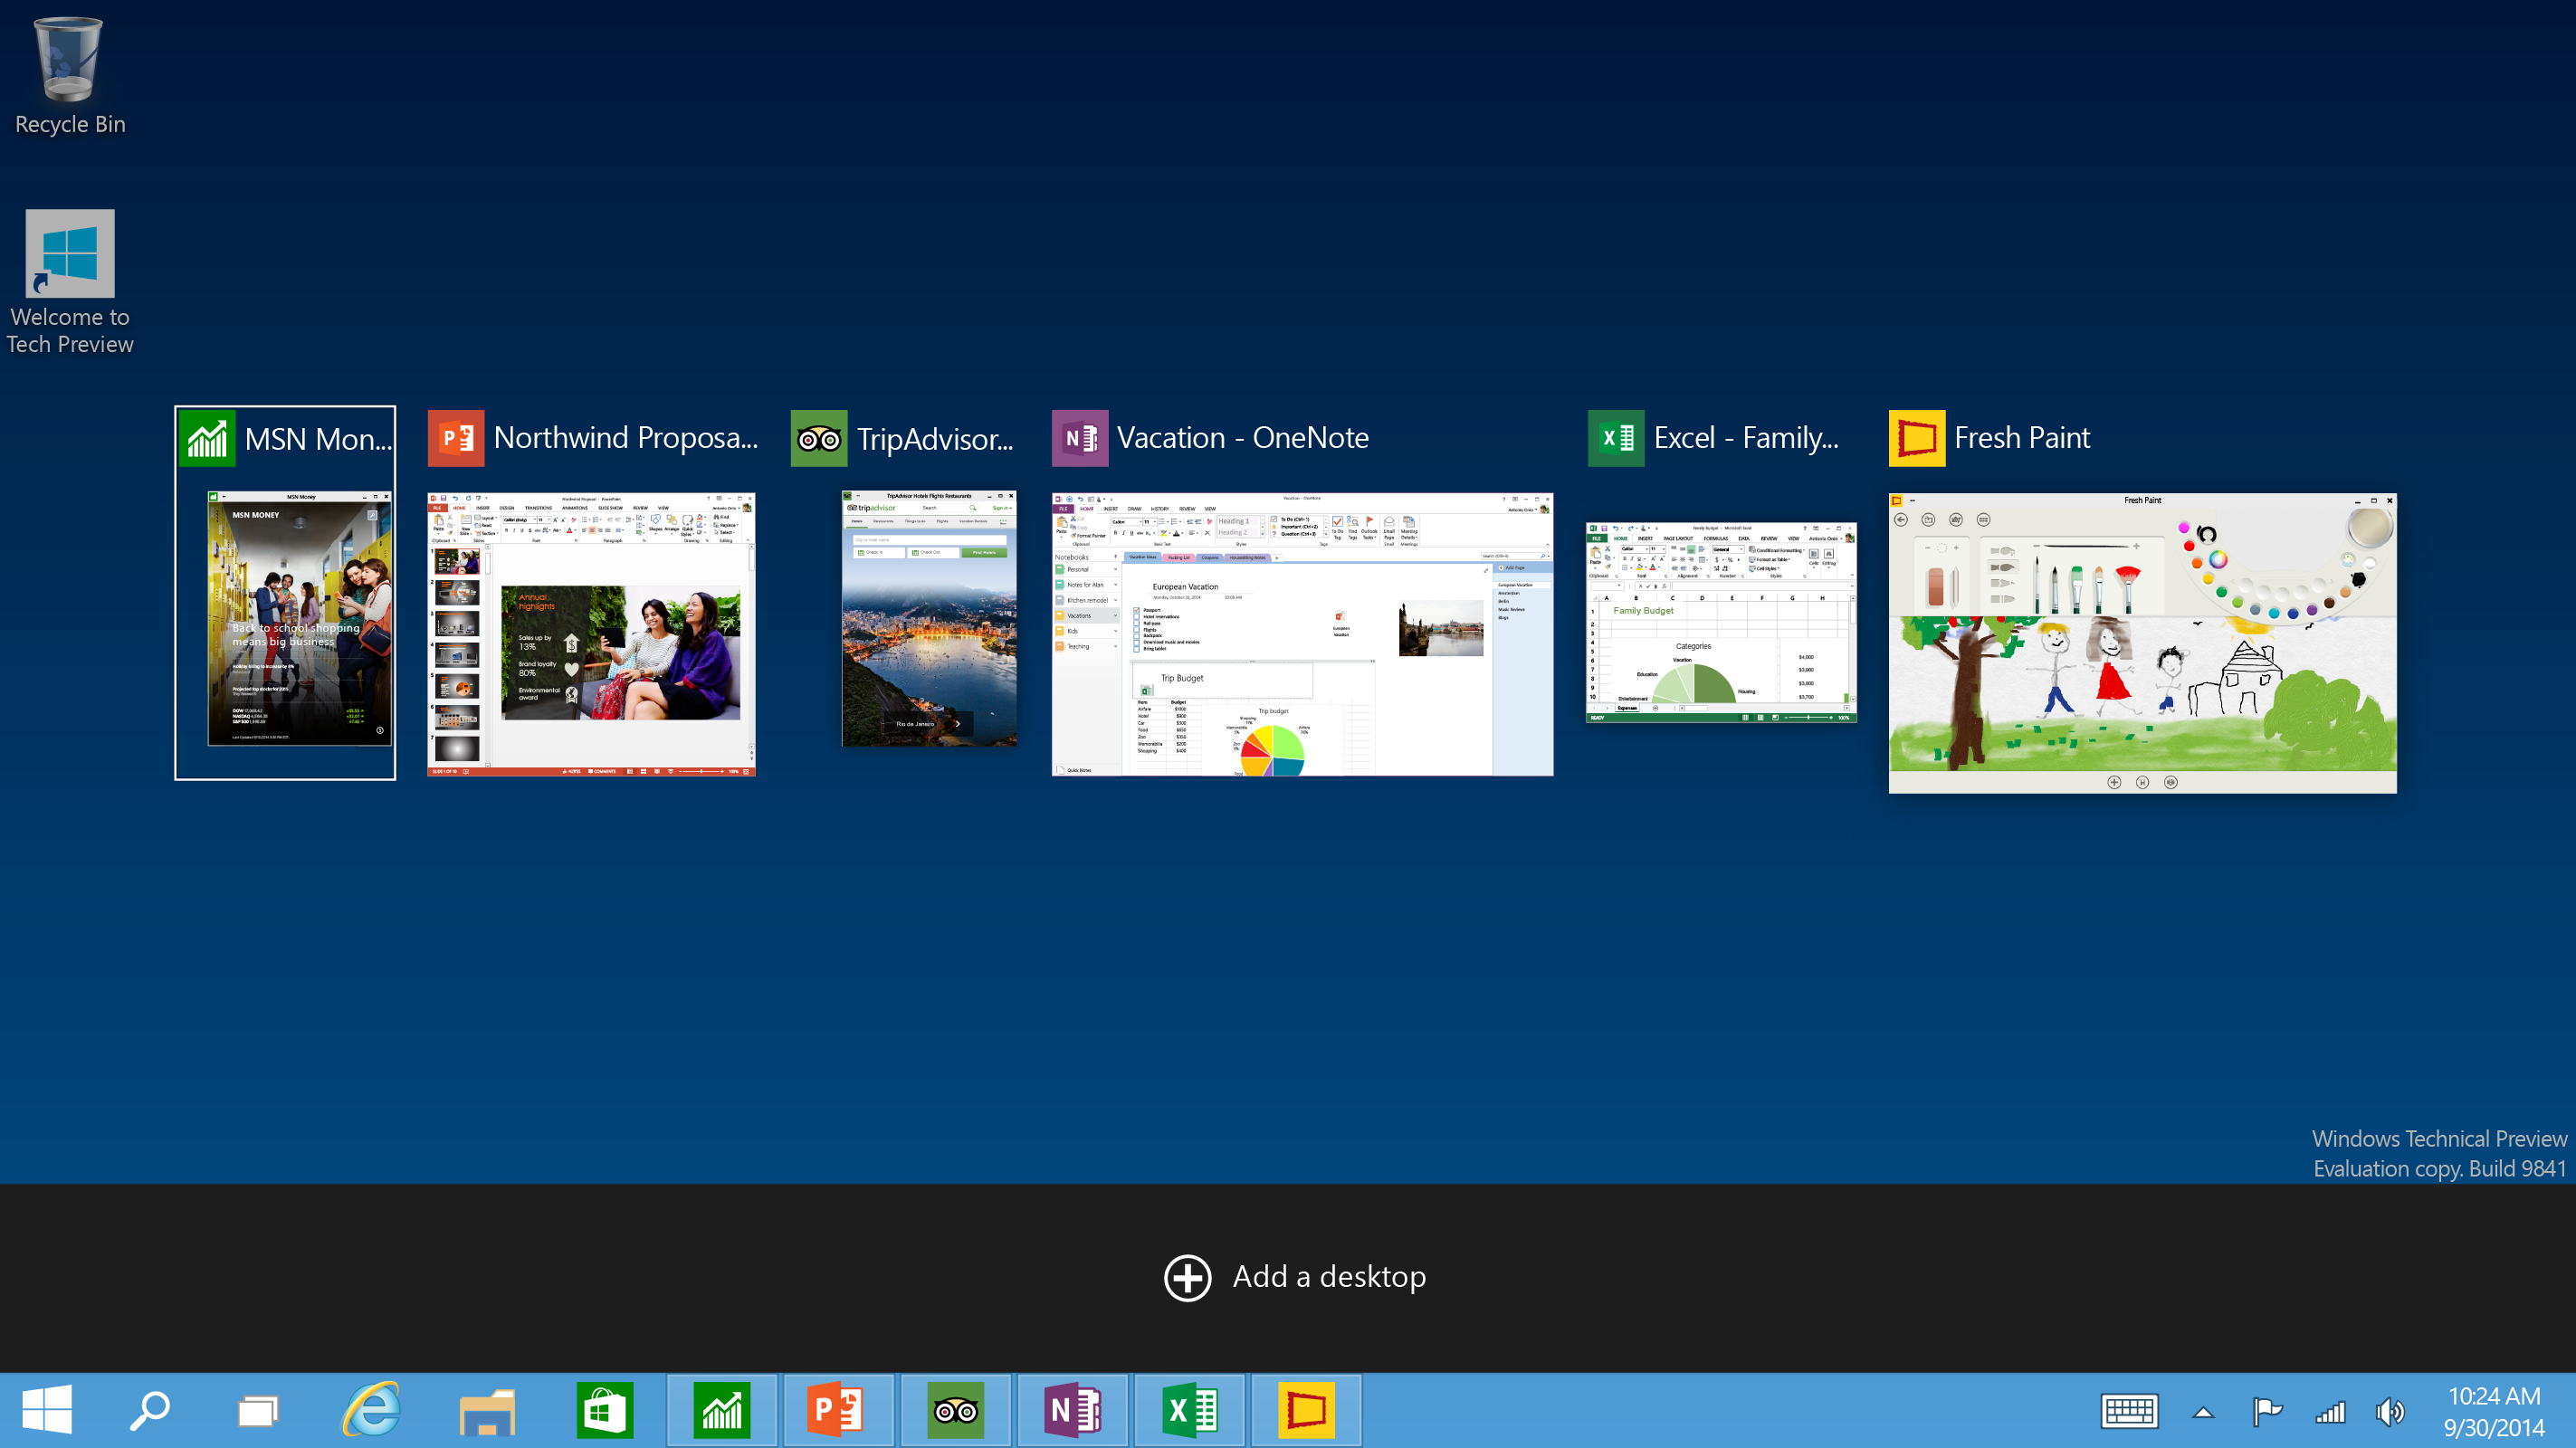 Tech Preview Task view - Microsoft Unveils Windows 10 with Major Improvements [Download Link Here]